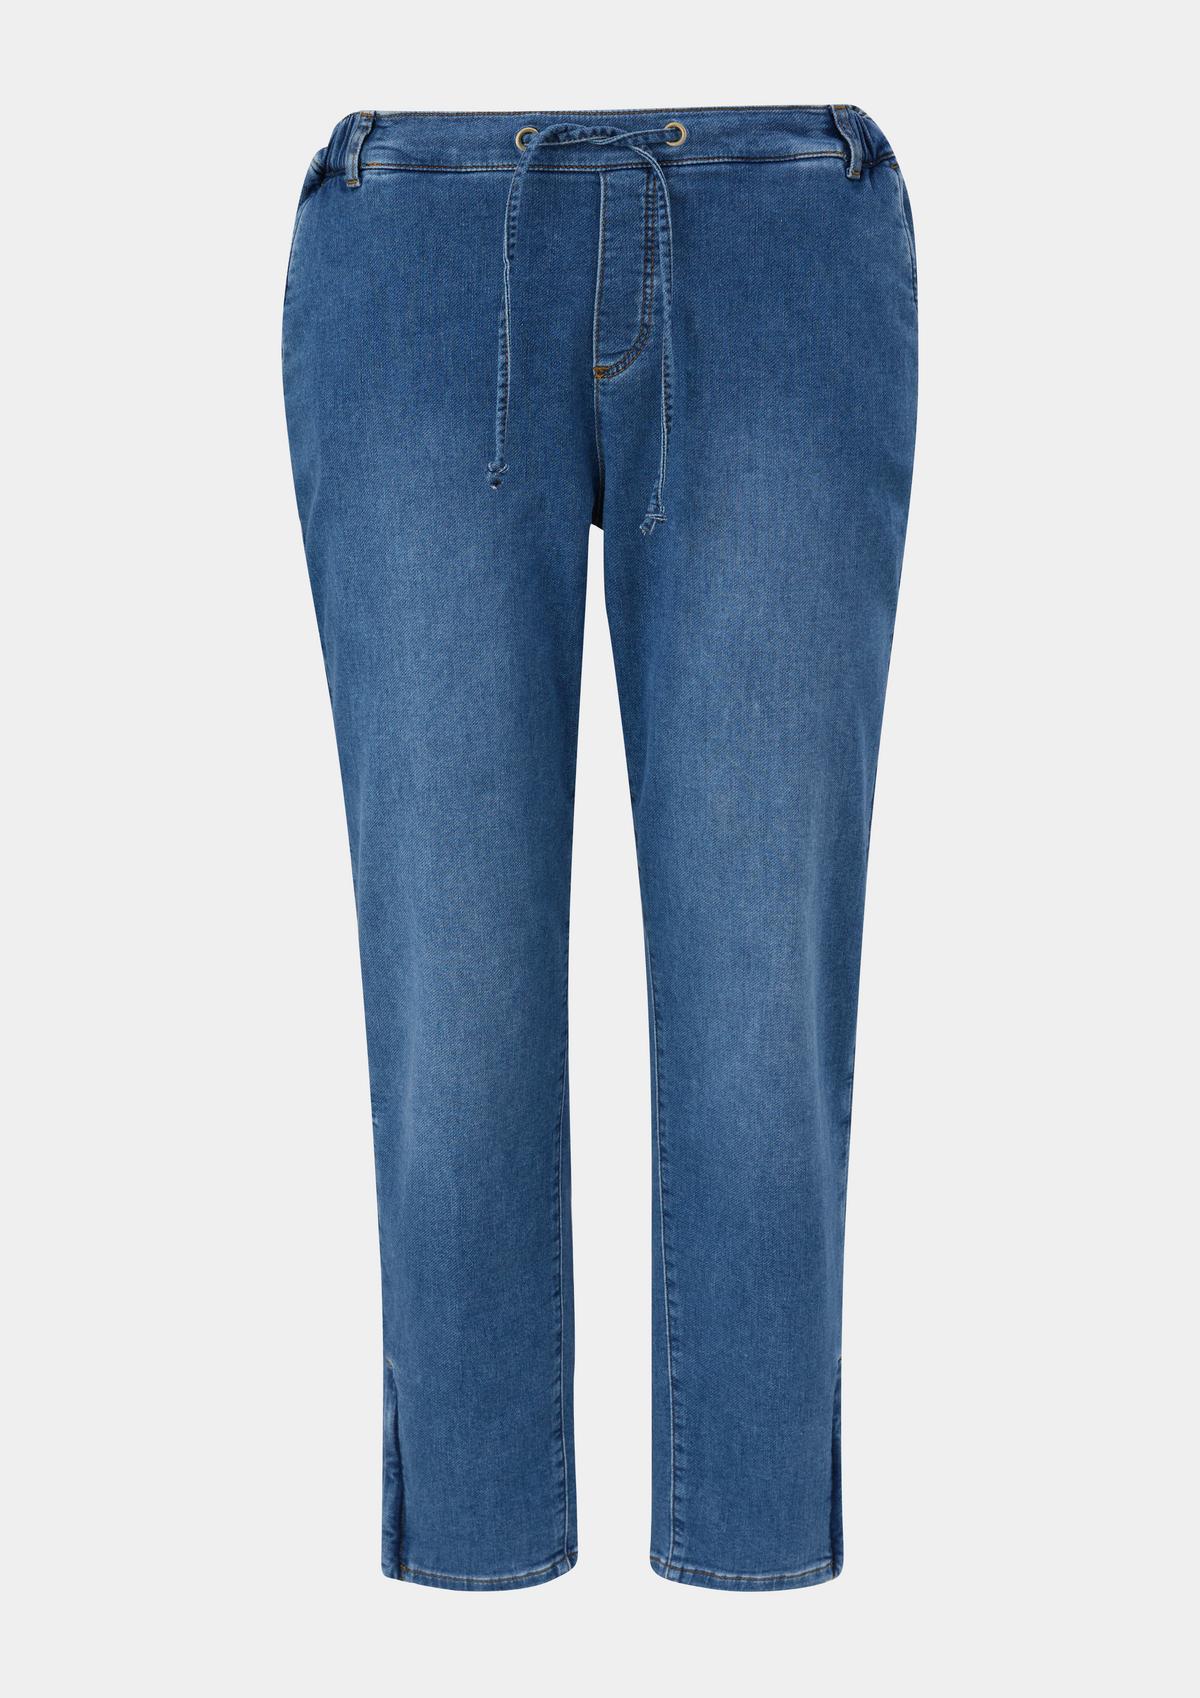 s.Oliver Jeans / relaxed fit / mid rise / slim leg